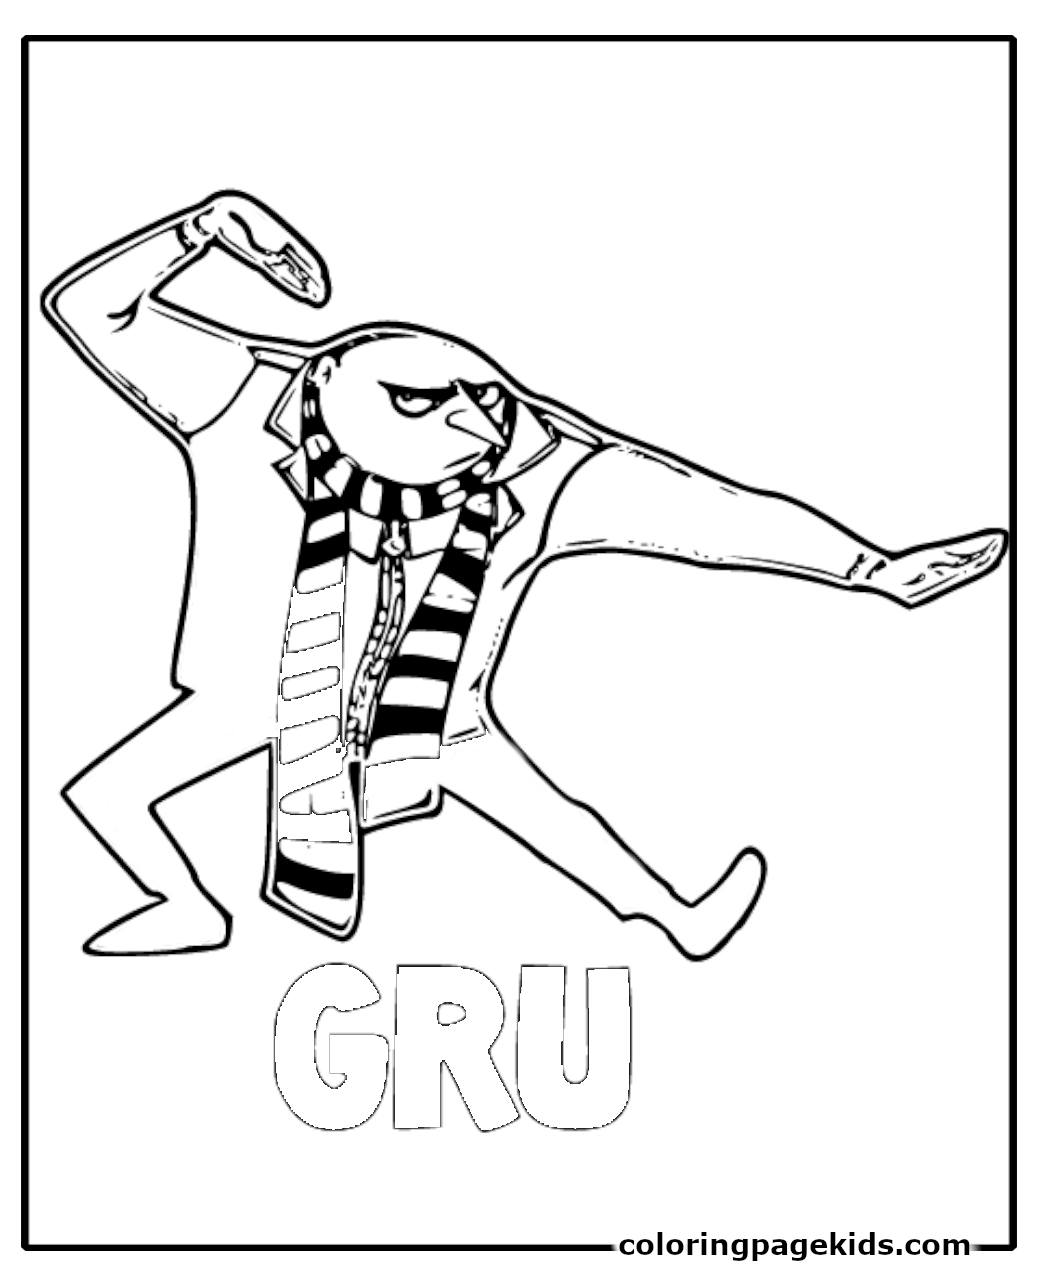 18 Free Printable Gru Coloring Pages For Kids